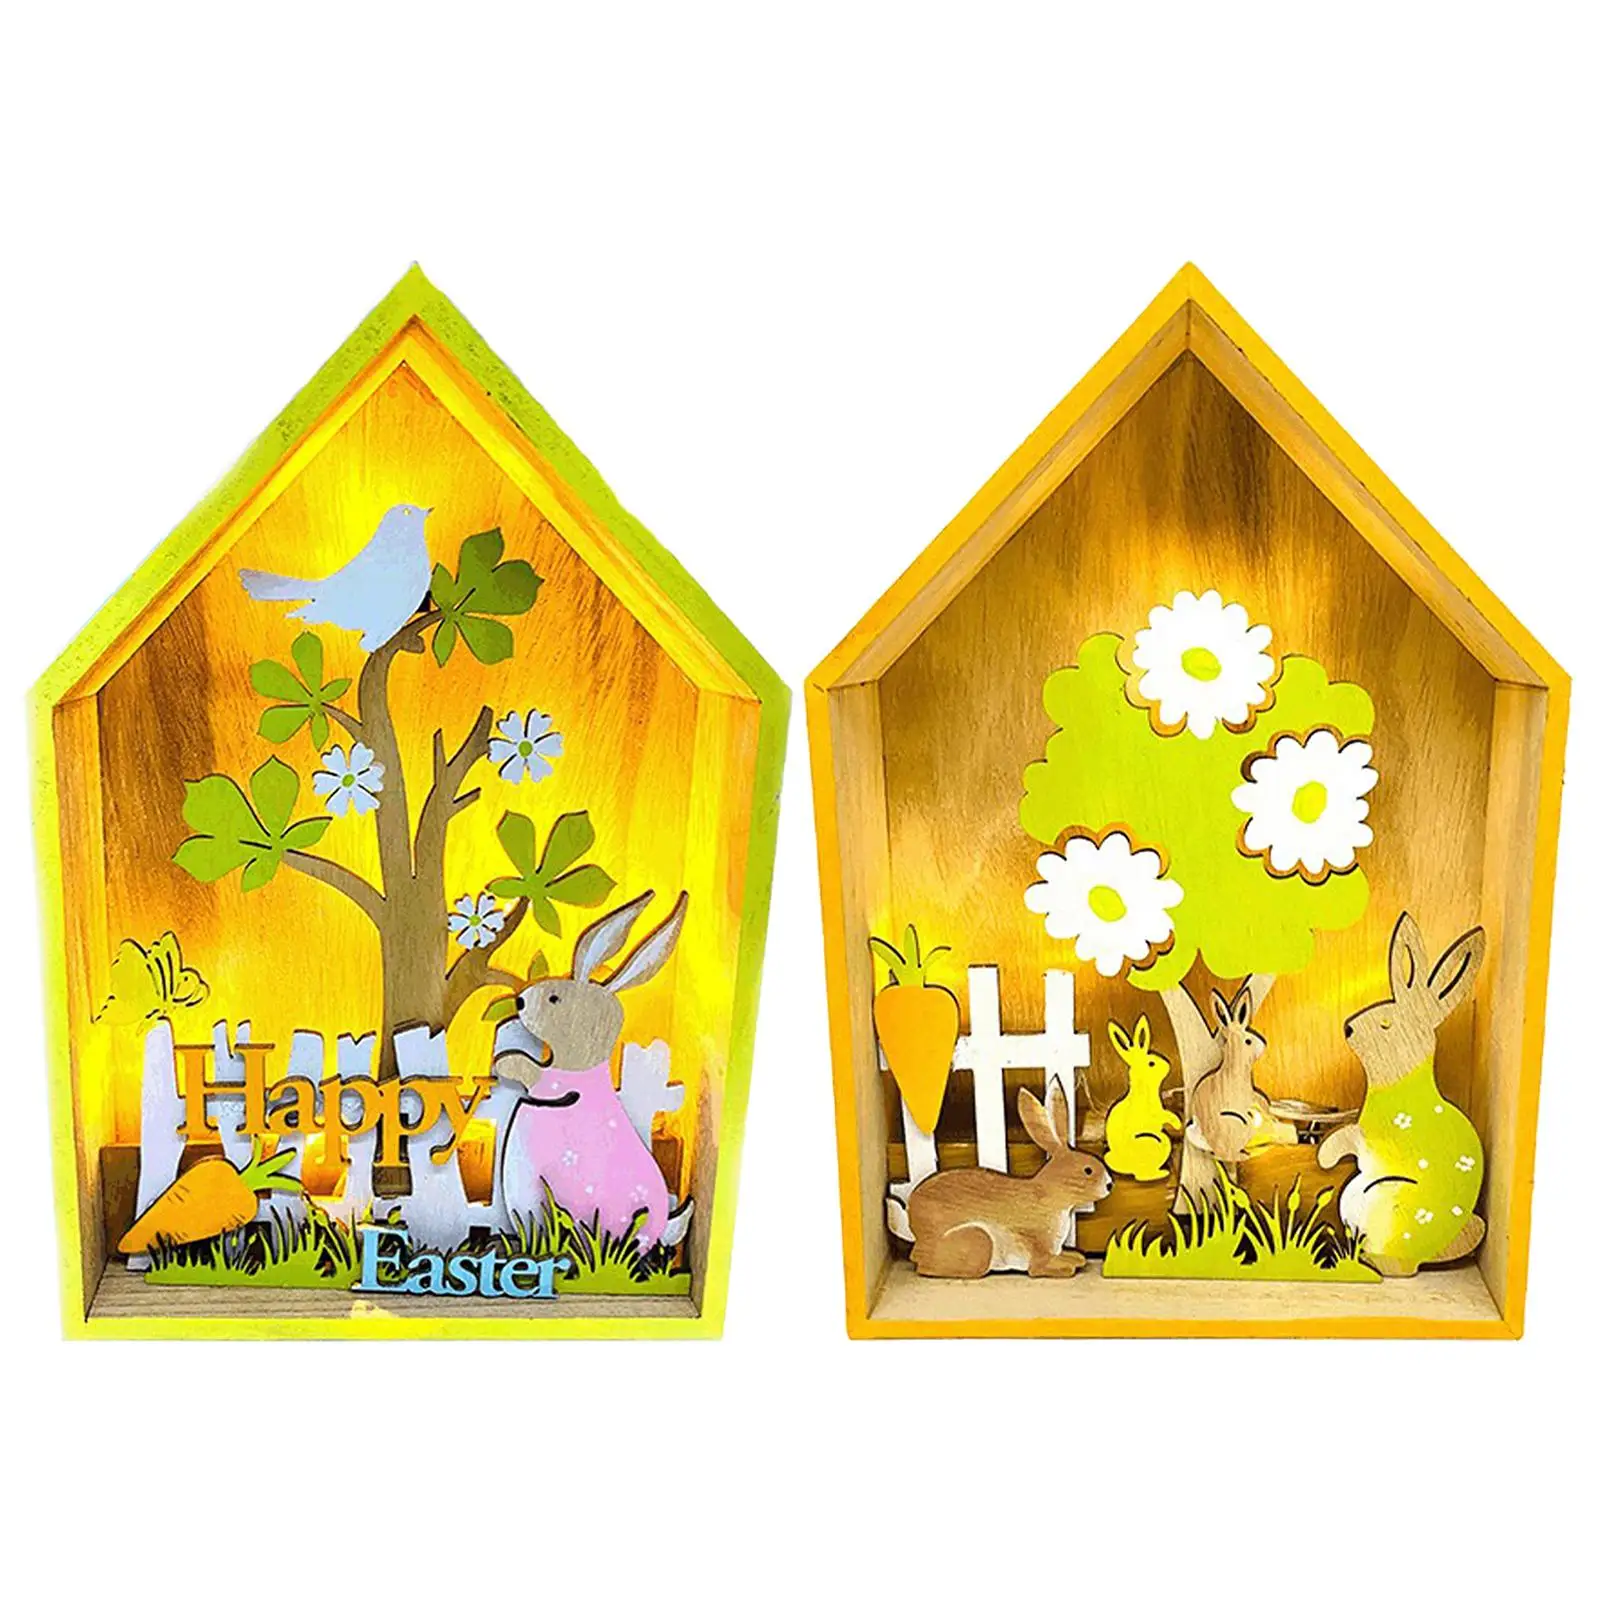 LED Easter Decoration, Battery Powered Centerpiece Easter Ornament Tabletop for Home Wedding Holiday